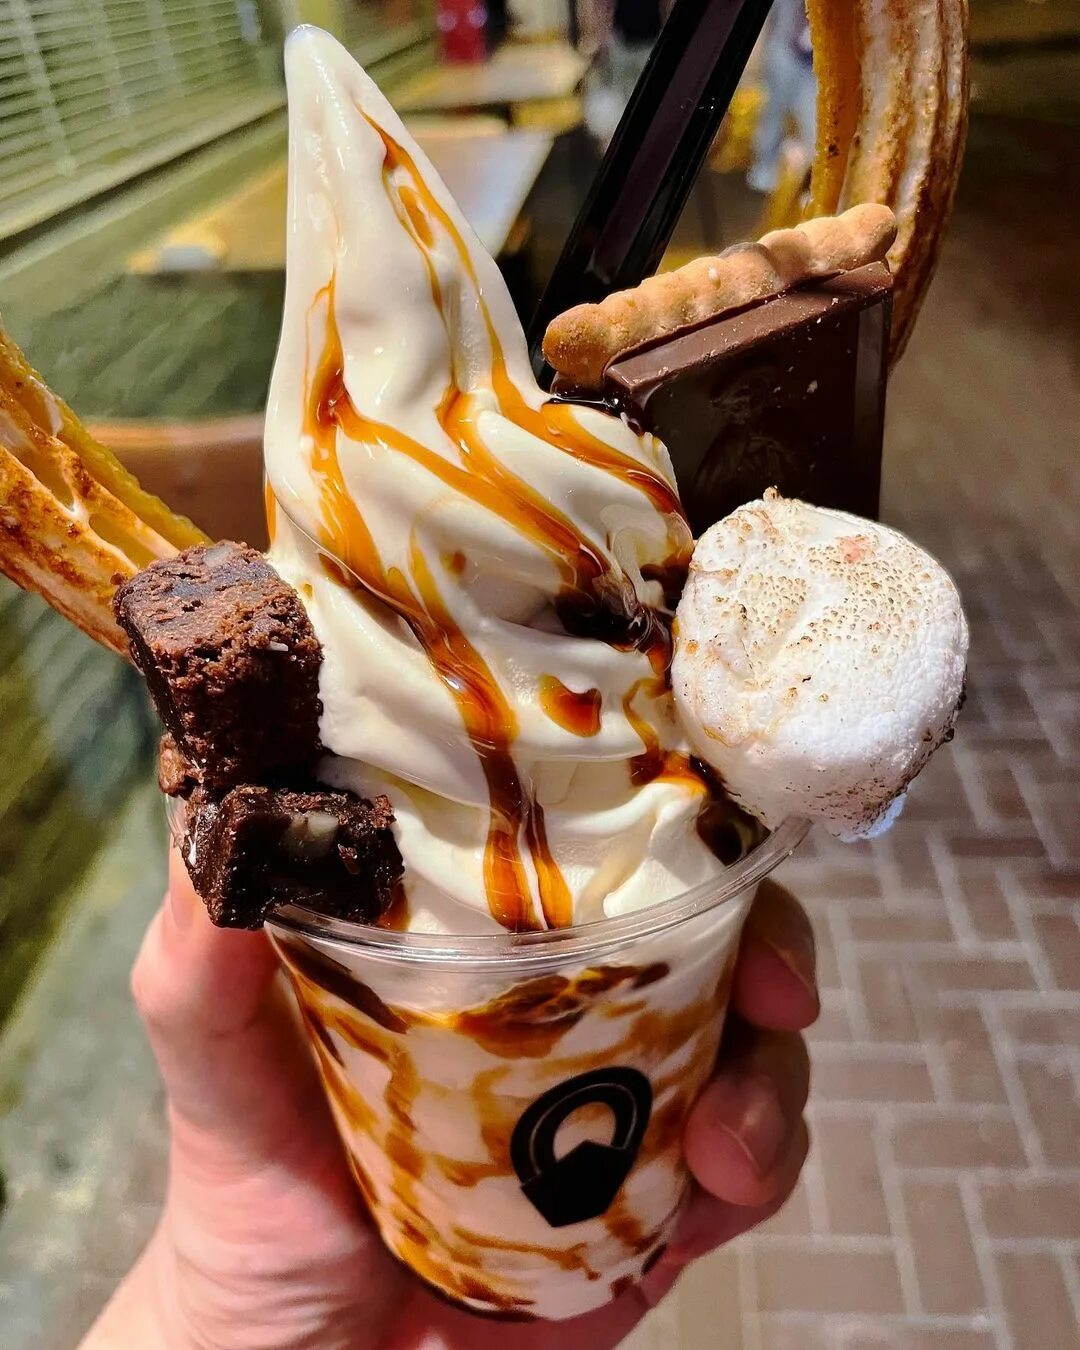 If your 3 wishes were #churro #brownie and #icecream.